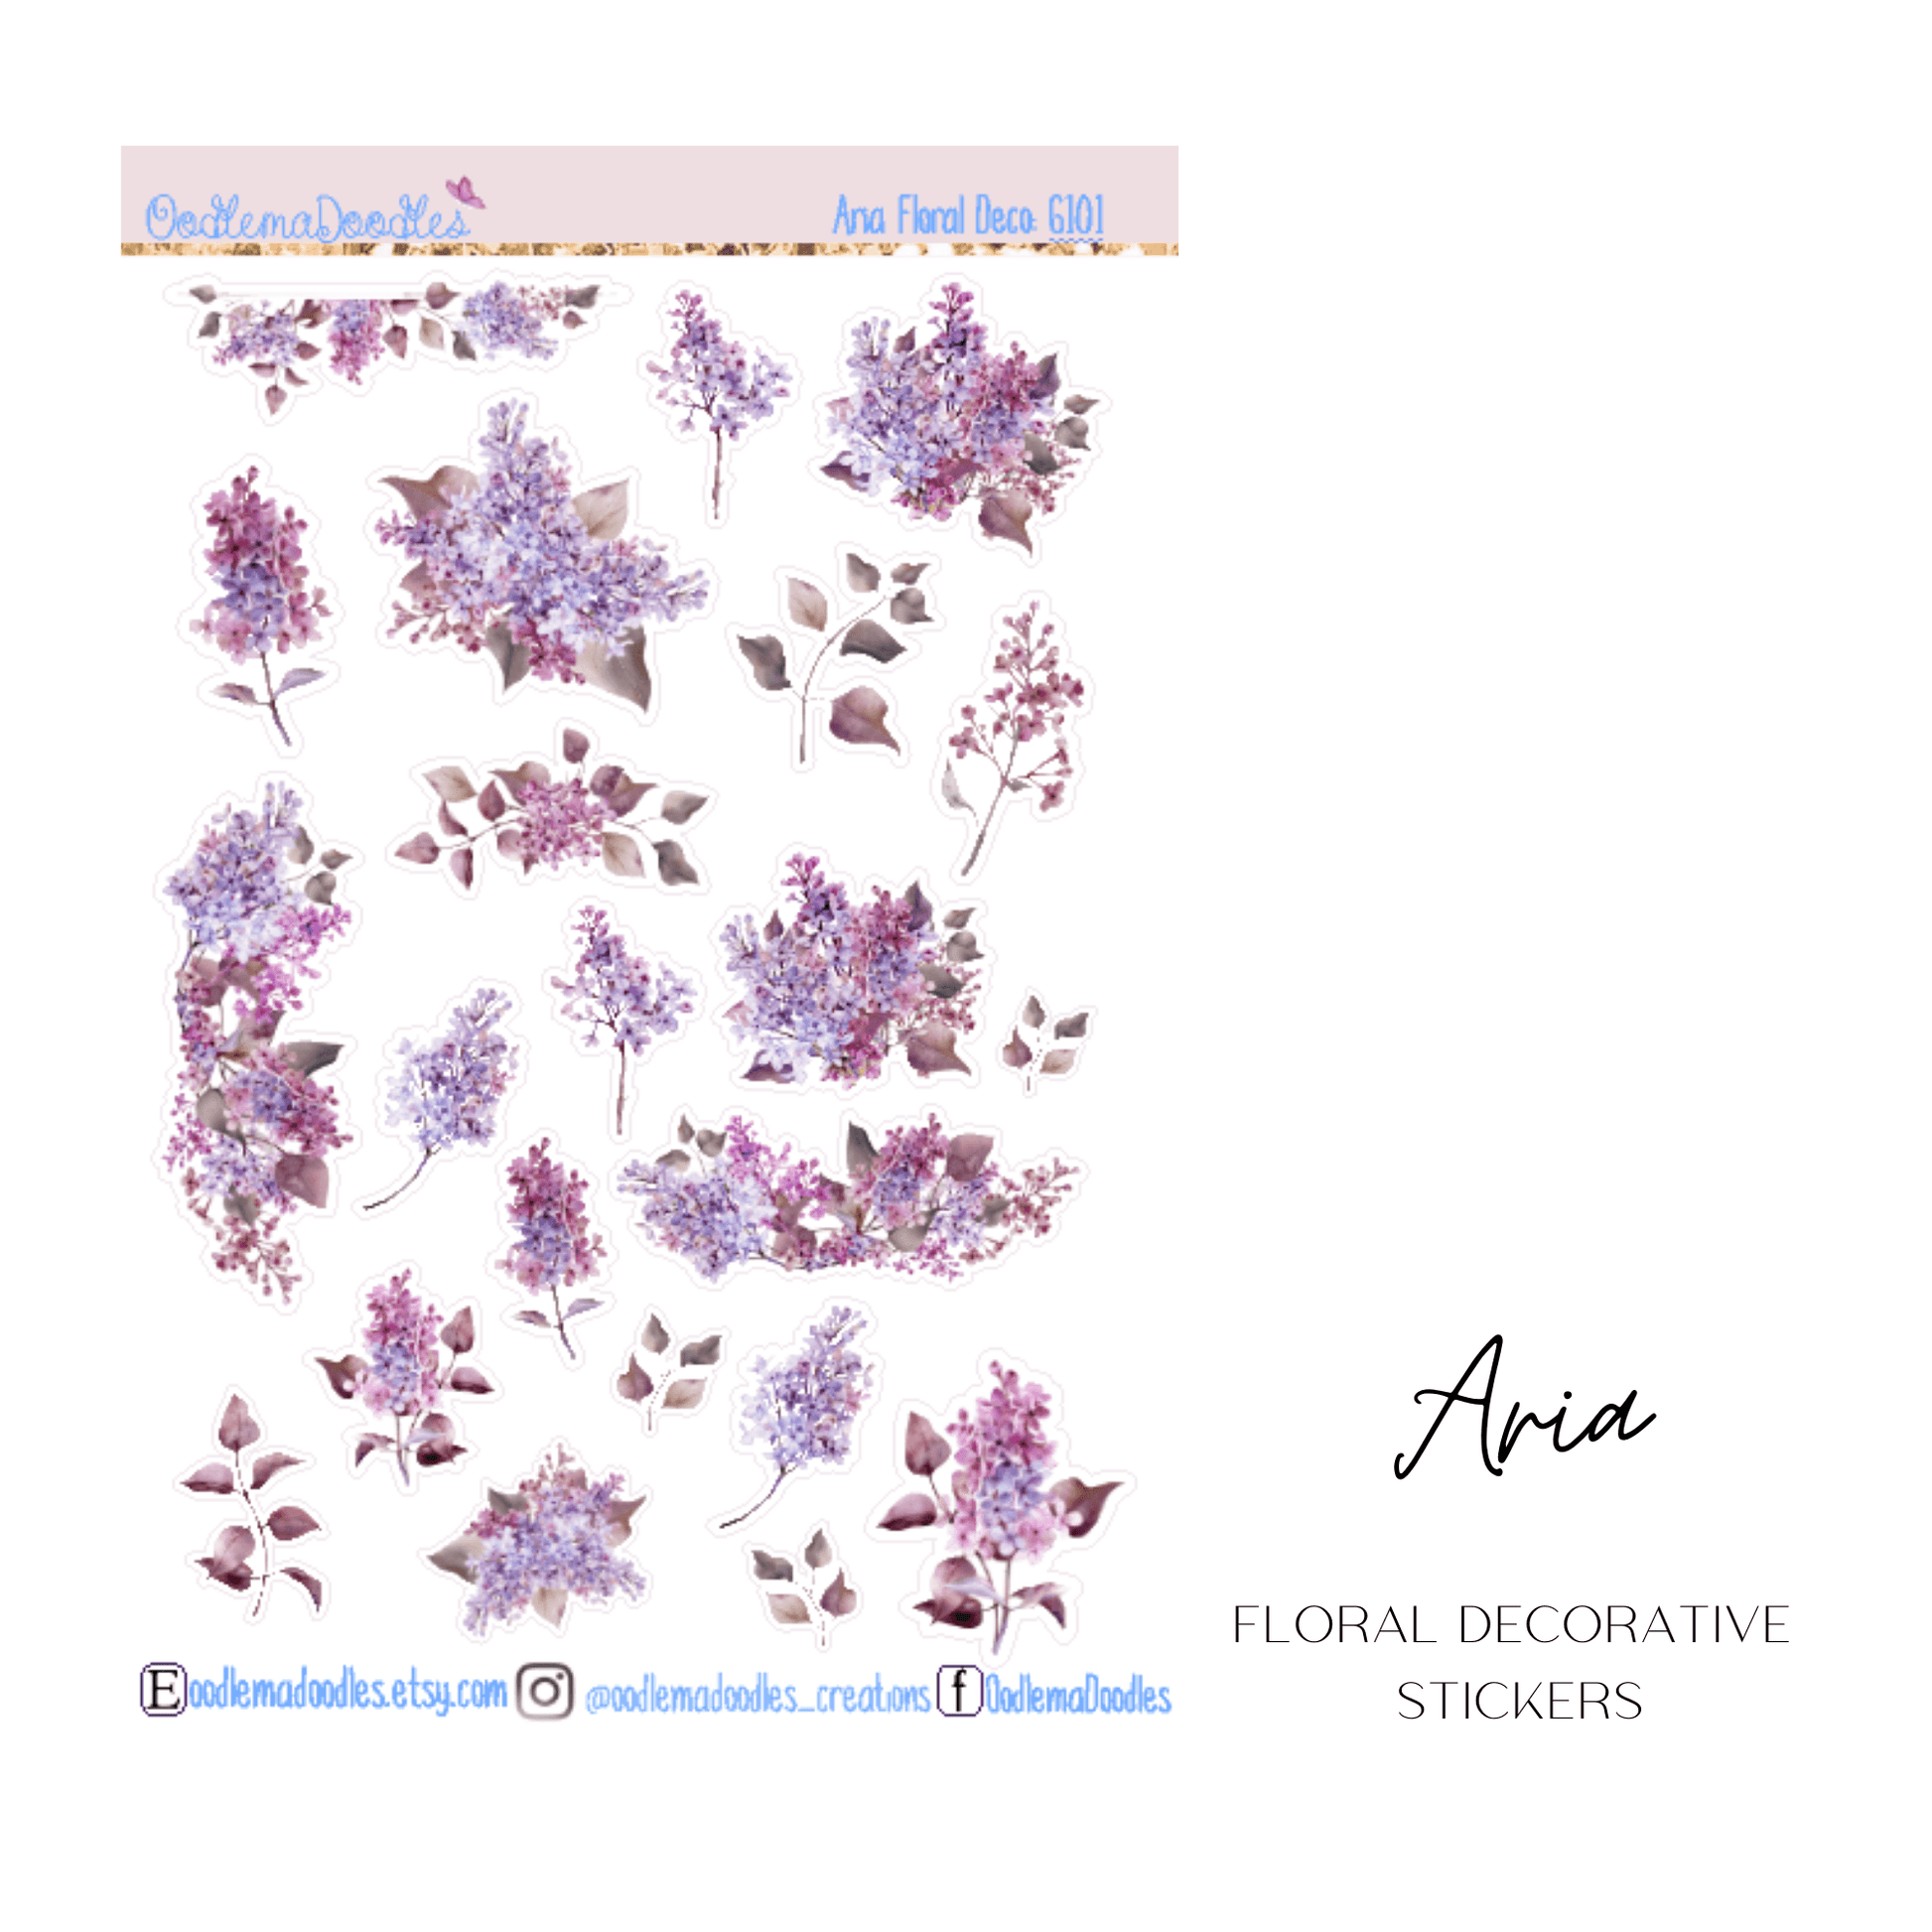 Aria Floral Decorative Stickers - oodlemadoodles